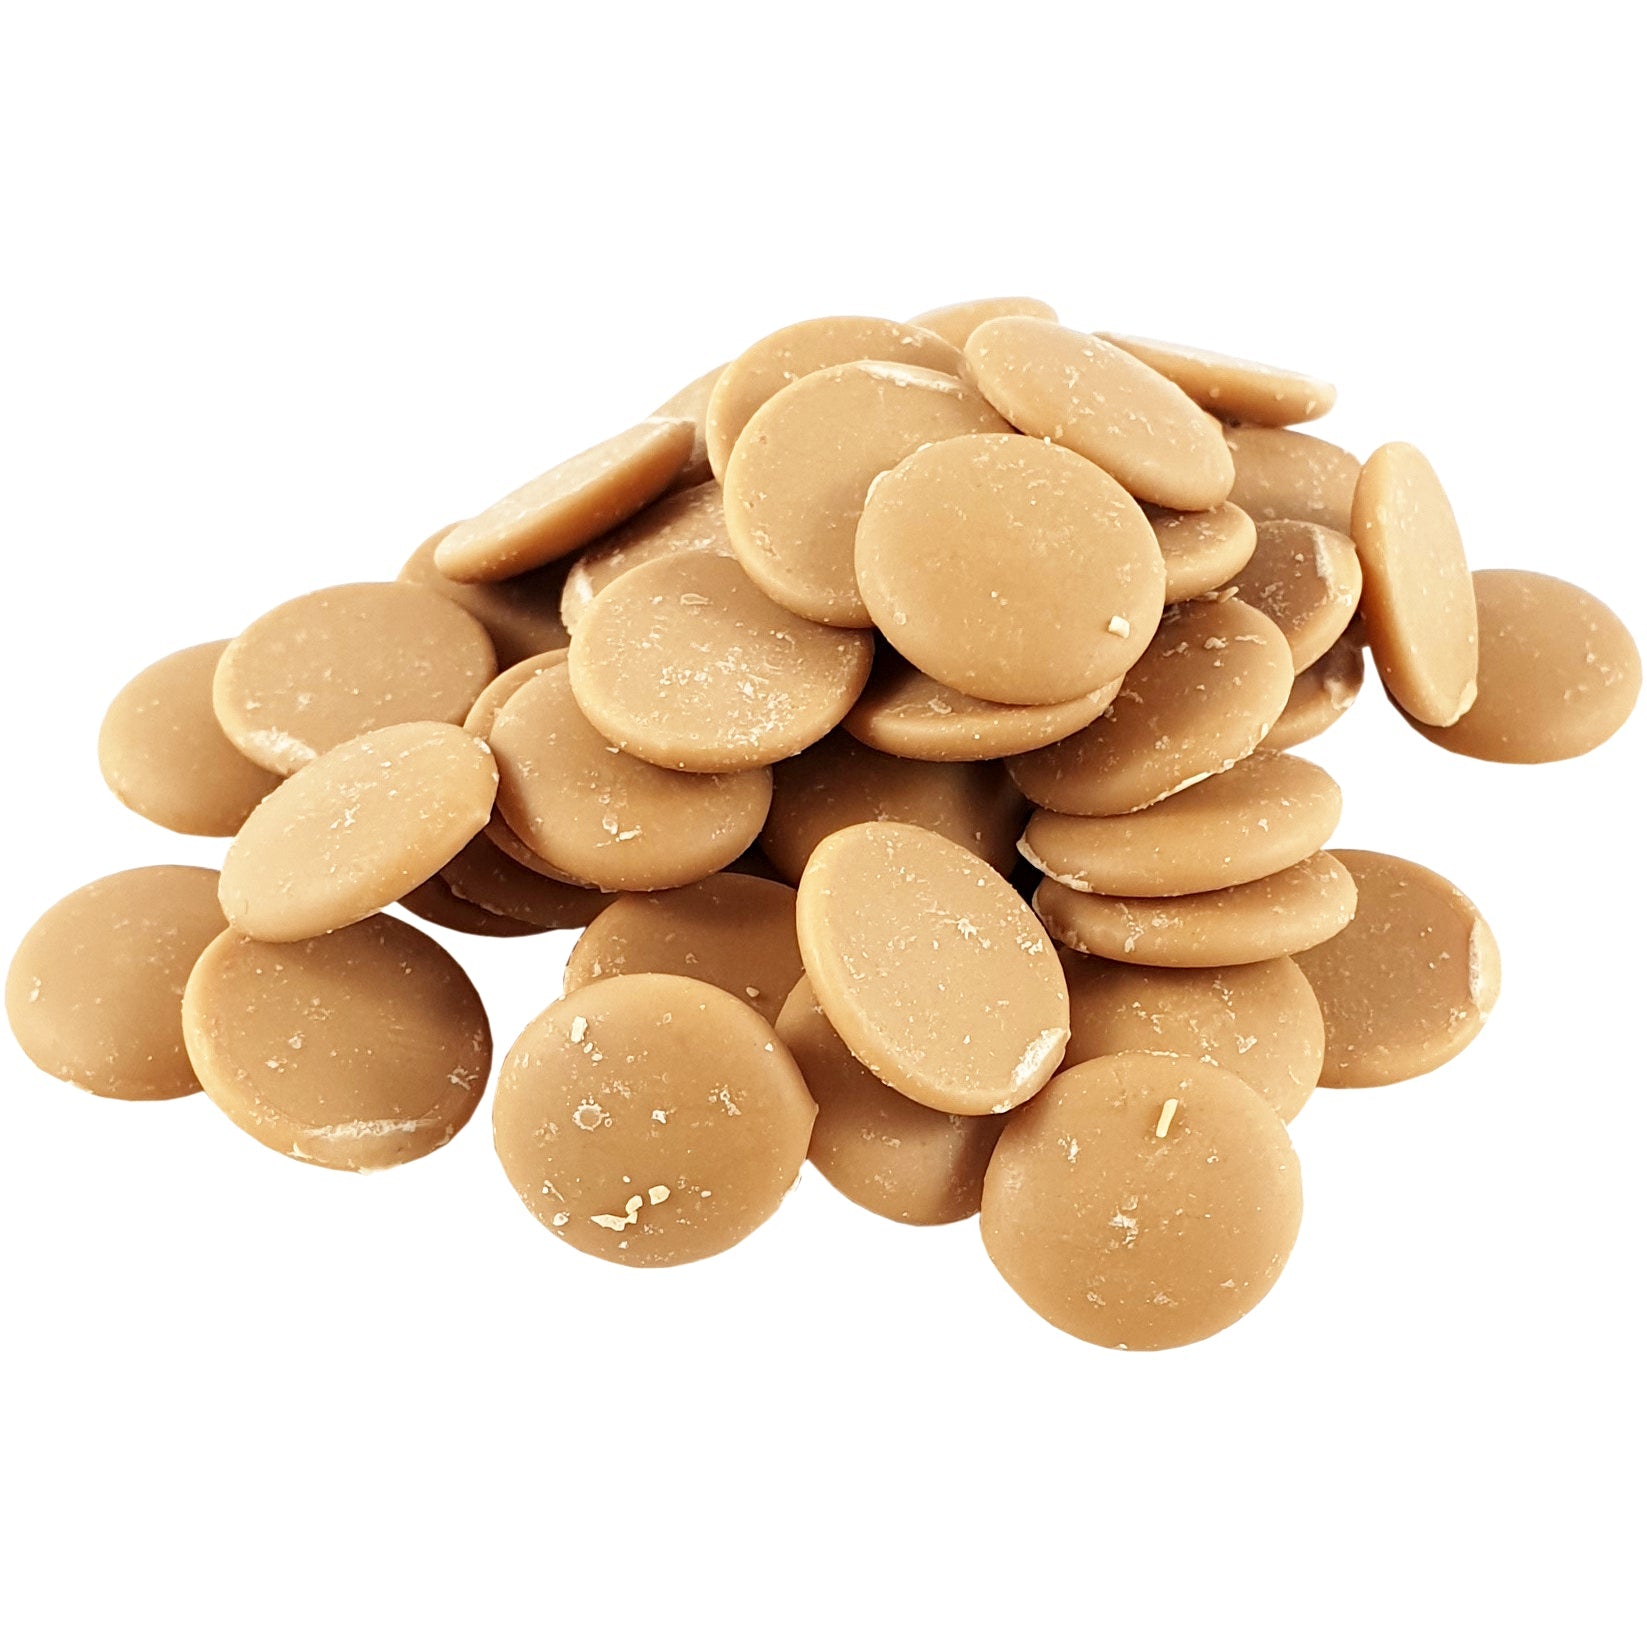 Chocolate Buttons Caramel Couverture chocolate - Gluten Free 2kg